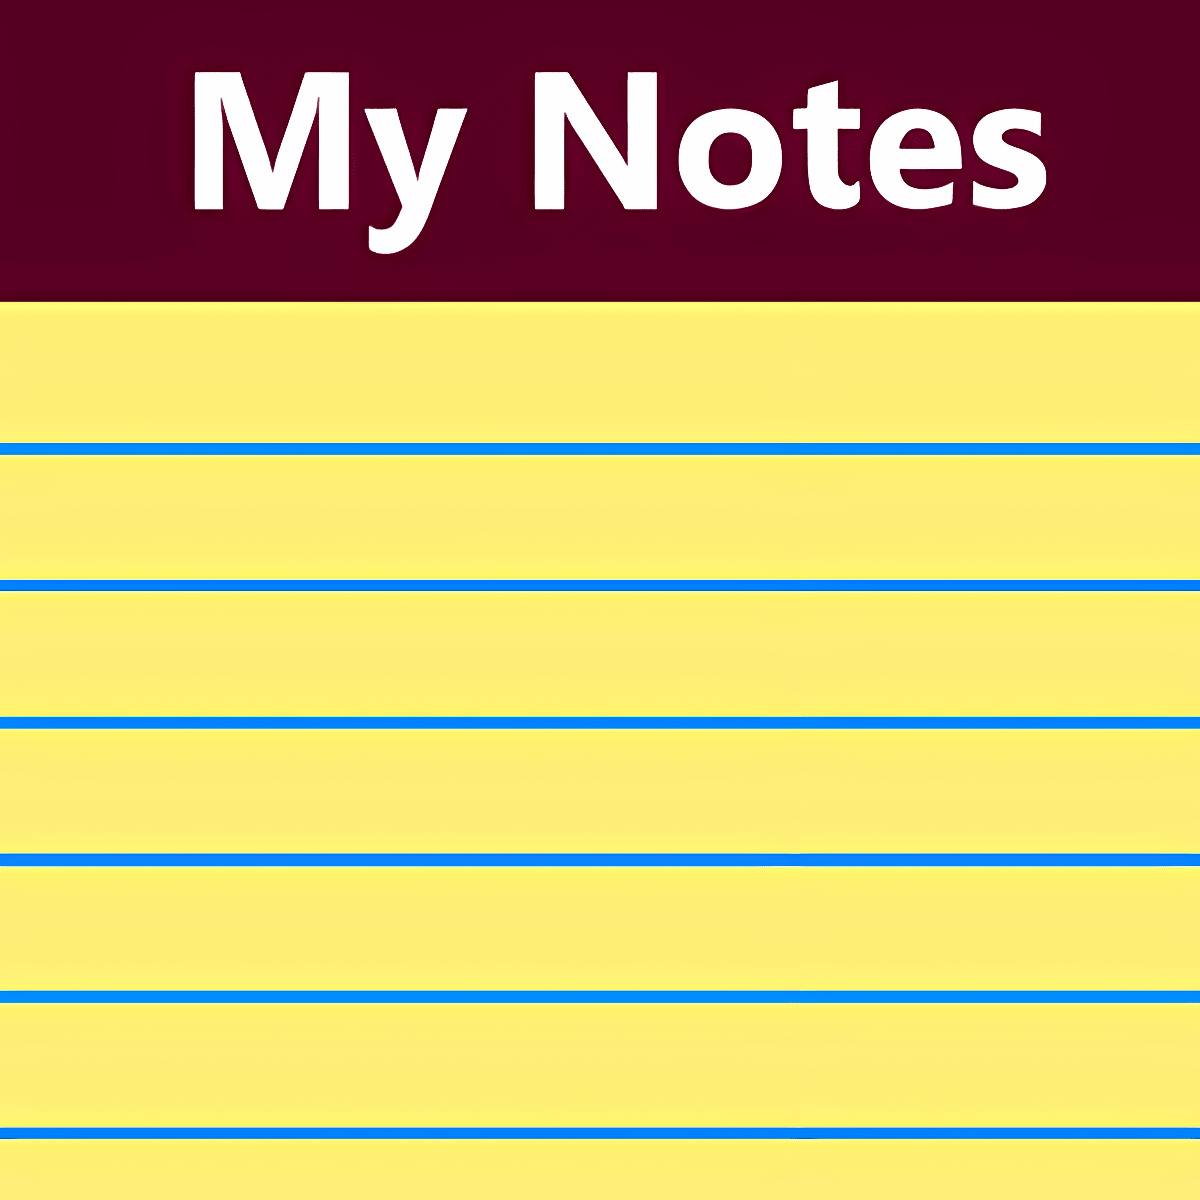 Download My Notes Install Latest App downloader